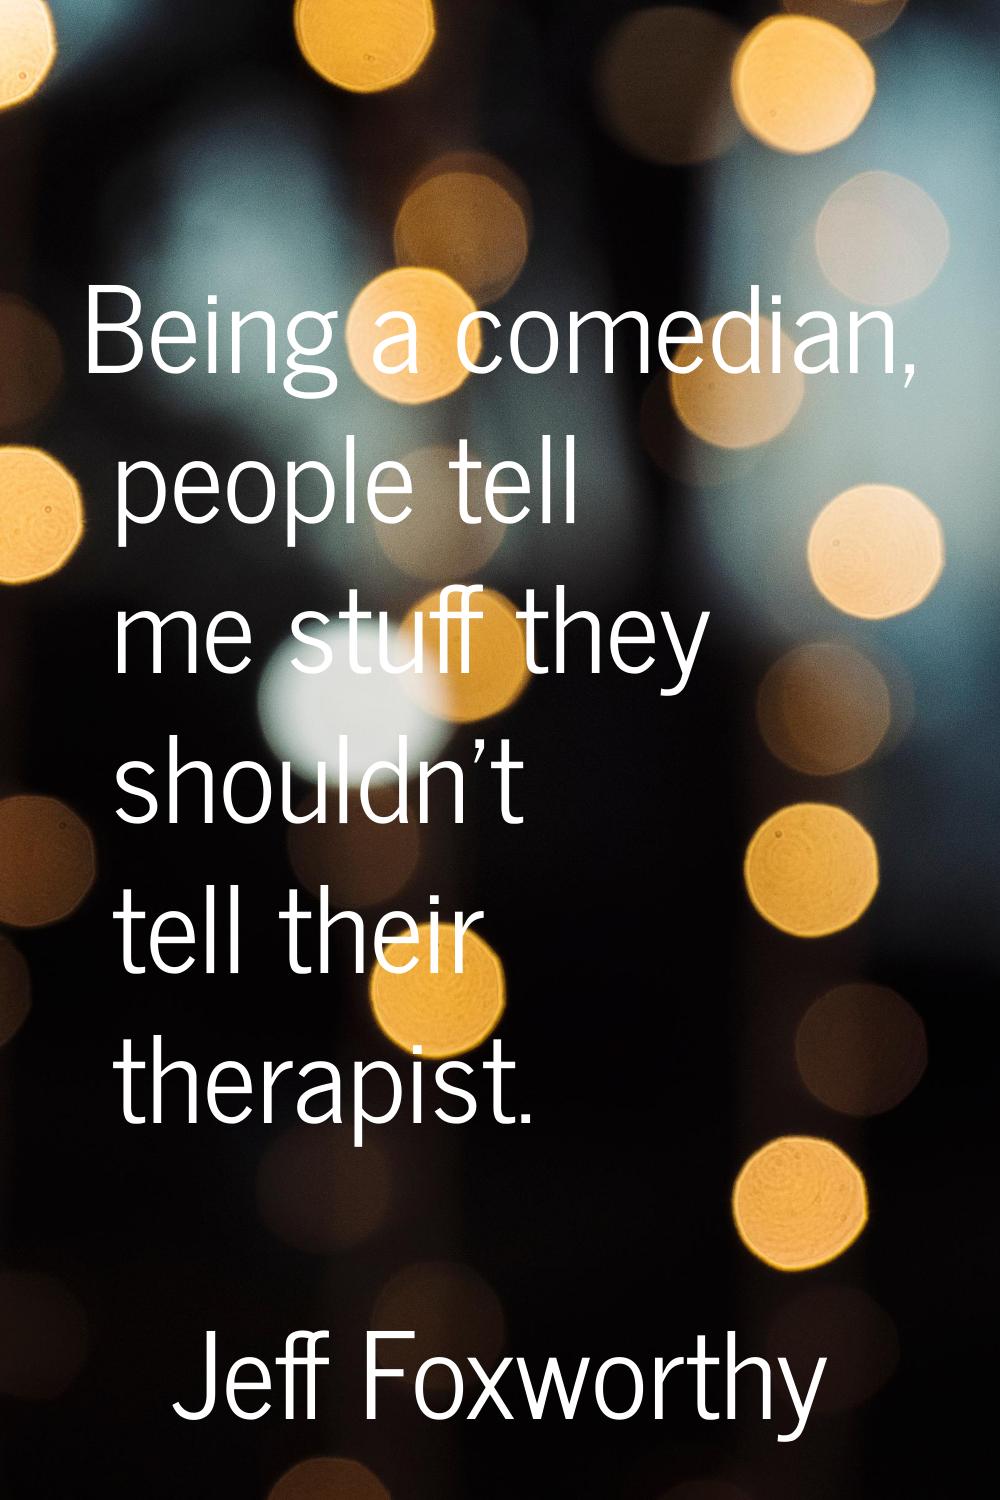 Being a comedian, people tell me stuff they shouldn't tell their therapist.